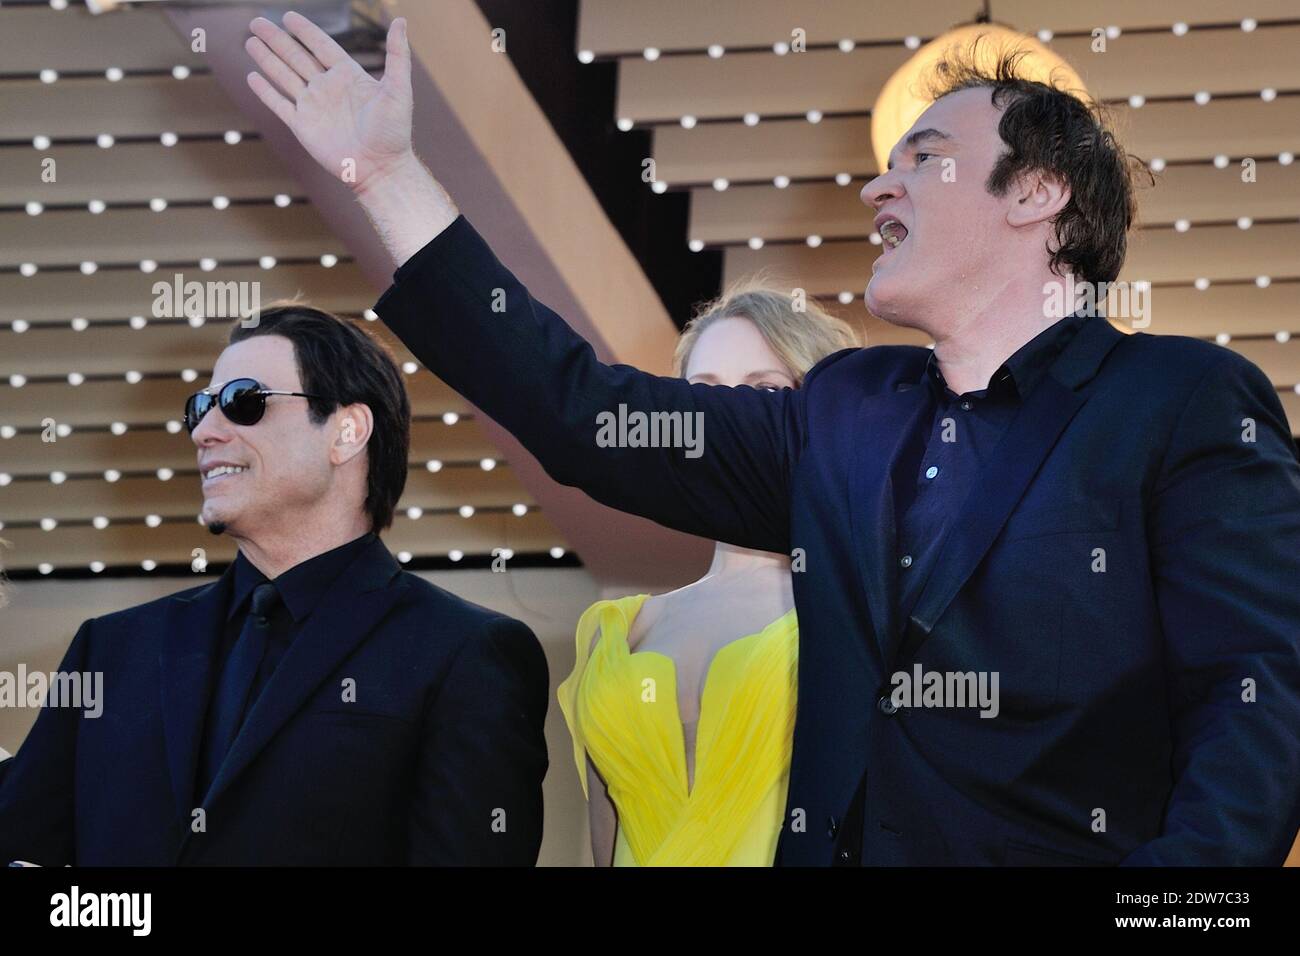 Quentin Tarantino, Uma Thurman, John Travolta arriving at the Palais des Festivals for the screening of the film Sils Maria as part of the 67th Cannes Film Festival in Cannes, France on May 23, 2014. Photo by Aurore Marechal/ABACAPRESS.COM Stock Photo